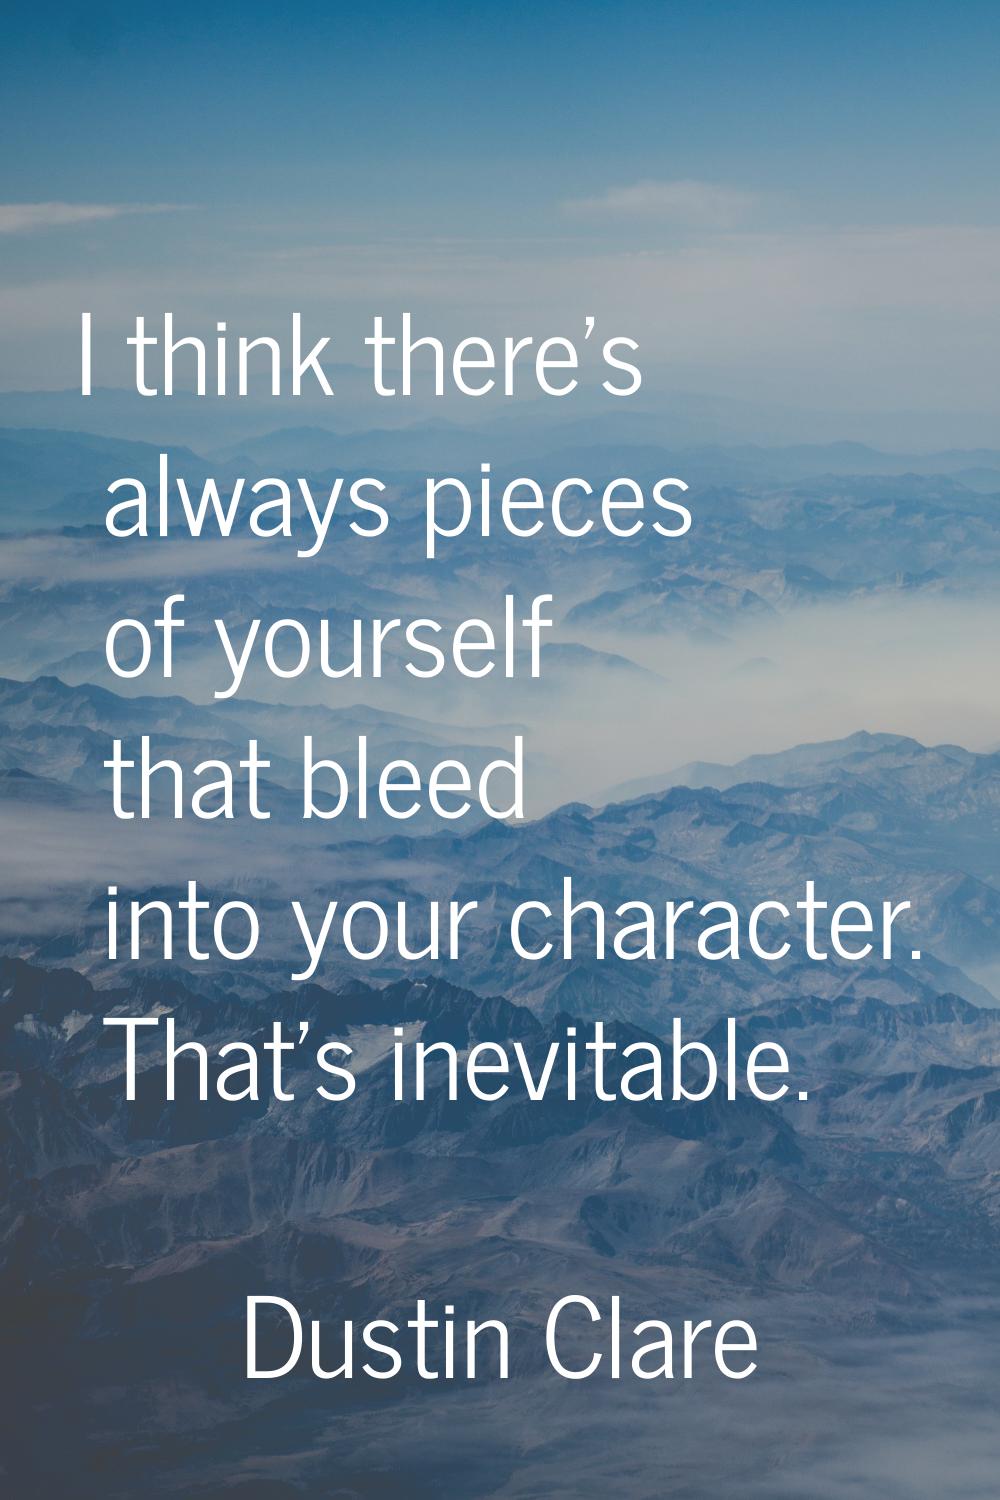 I think there's always pieces of yourself that bleed into your character. That's inevitable.